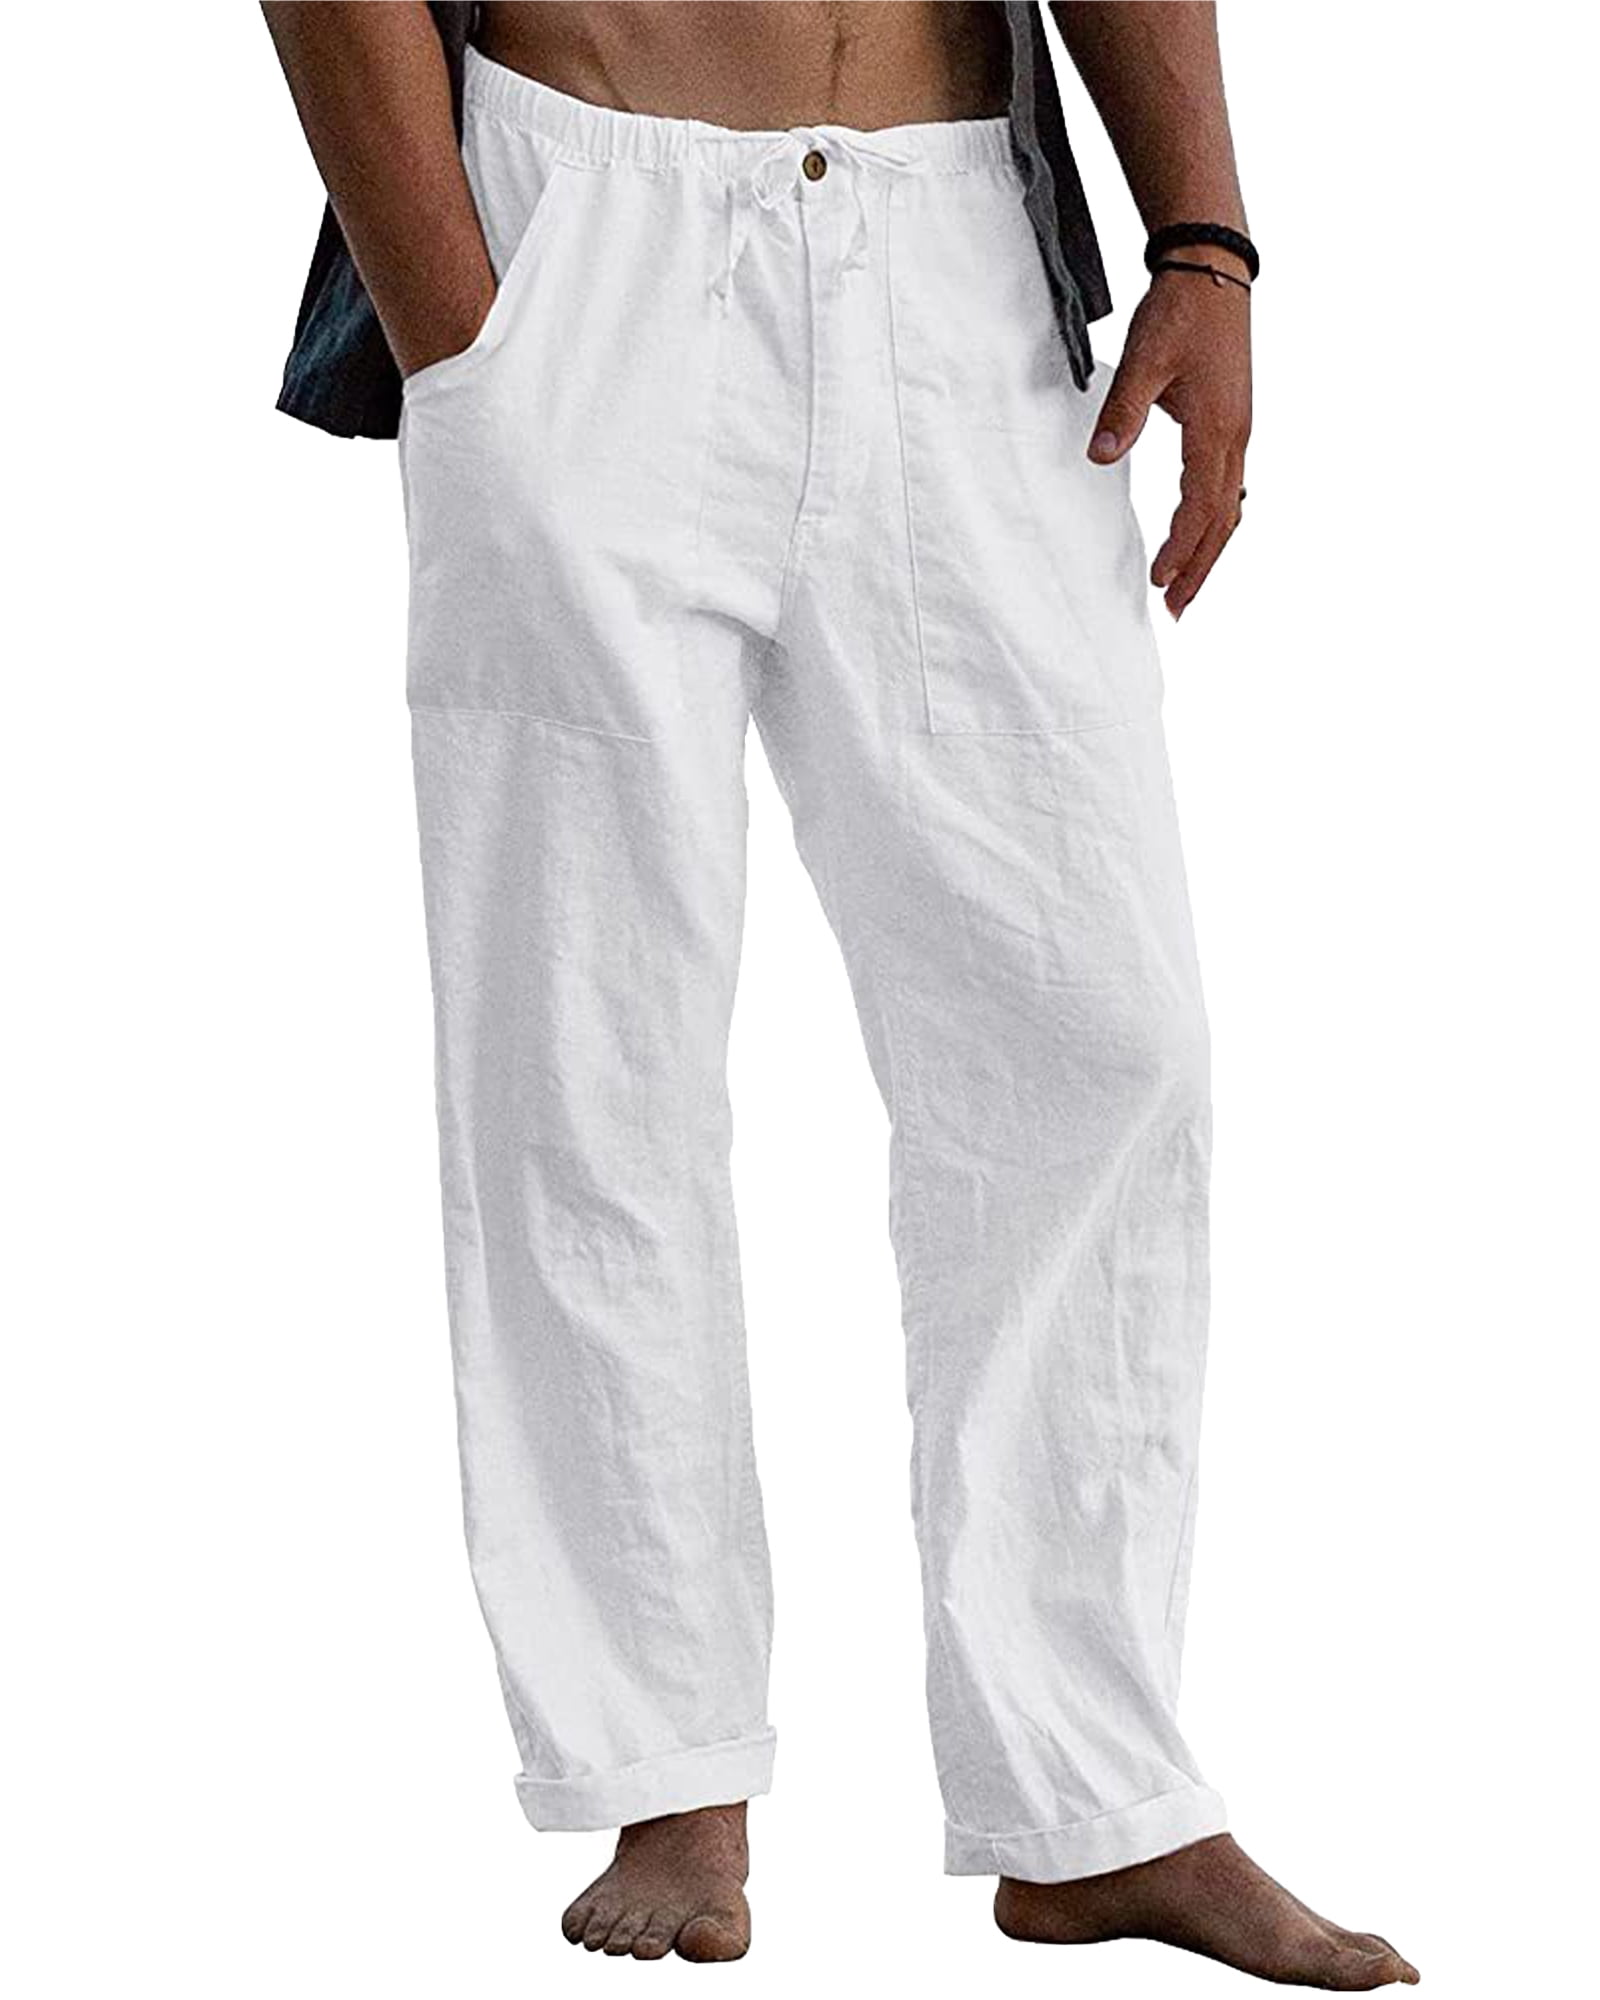 LVCBL Men's Summer Loose Casual Linen Long Trousers with Pockets ...